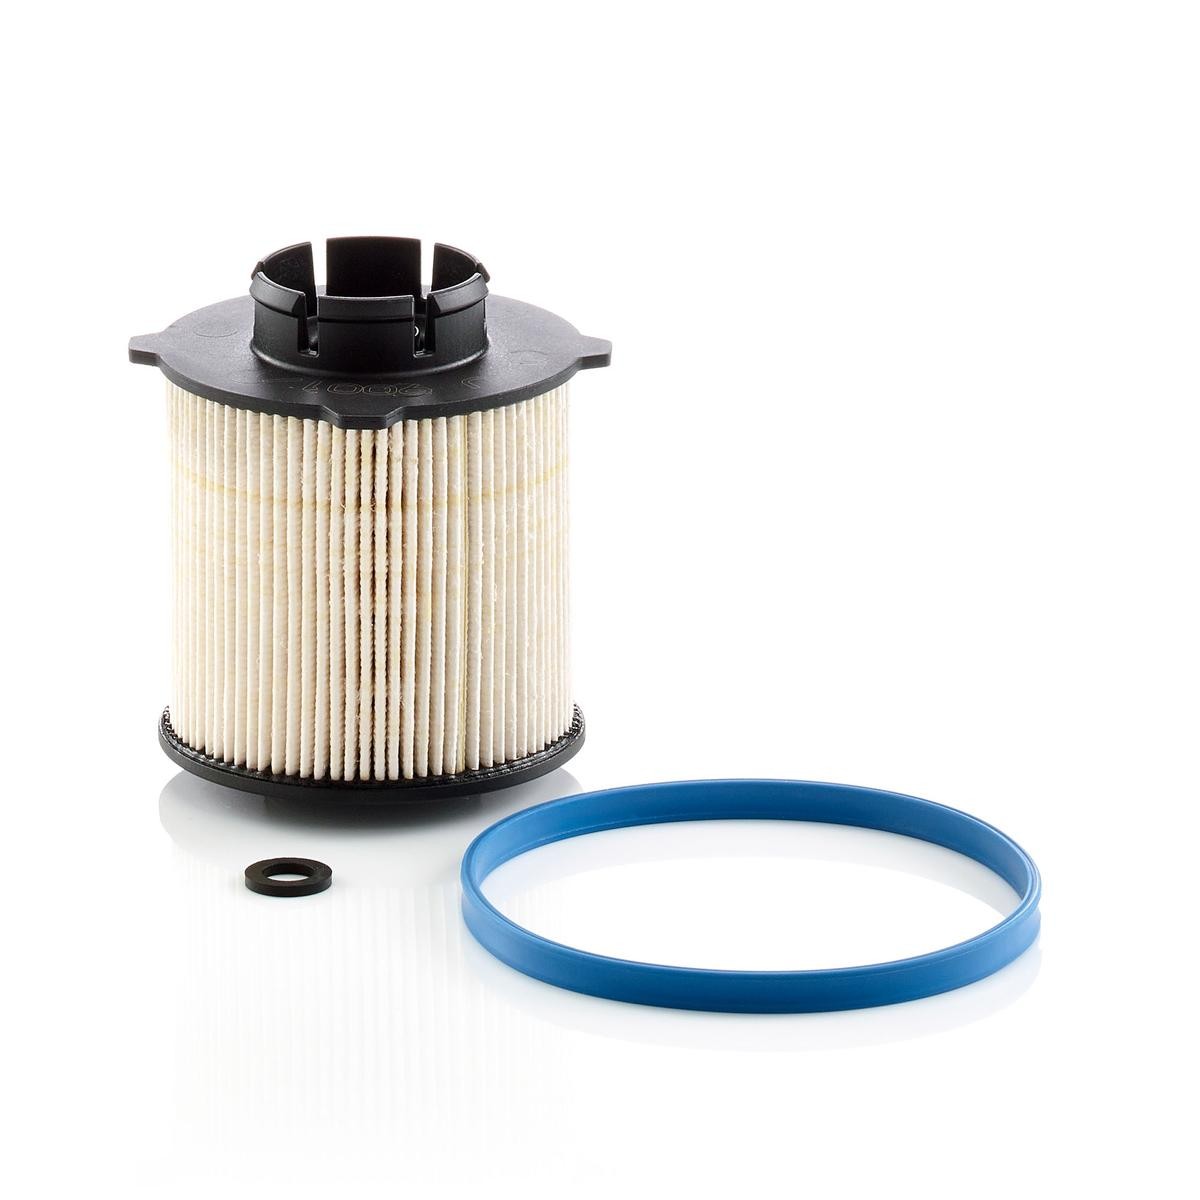 Opel Astra J Saloon Fuel delivery system parts - Fuel filter MANN-FILTER PU 9001/1 x